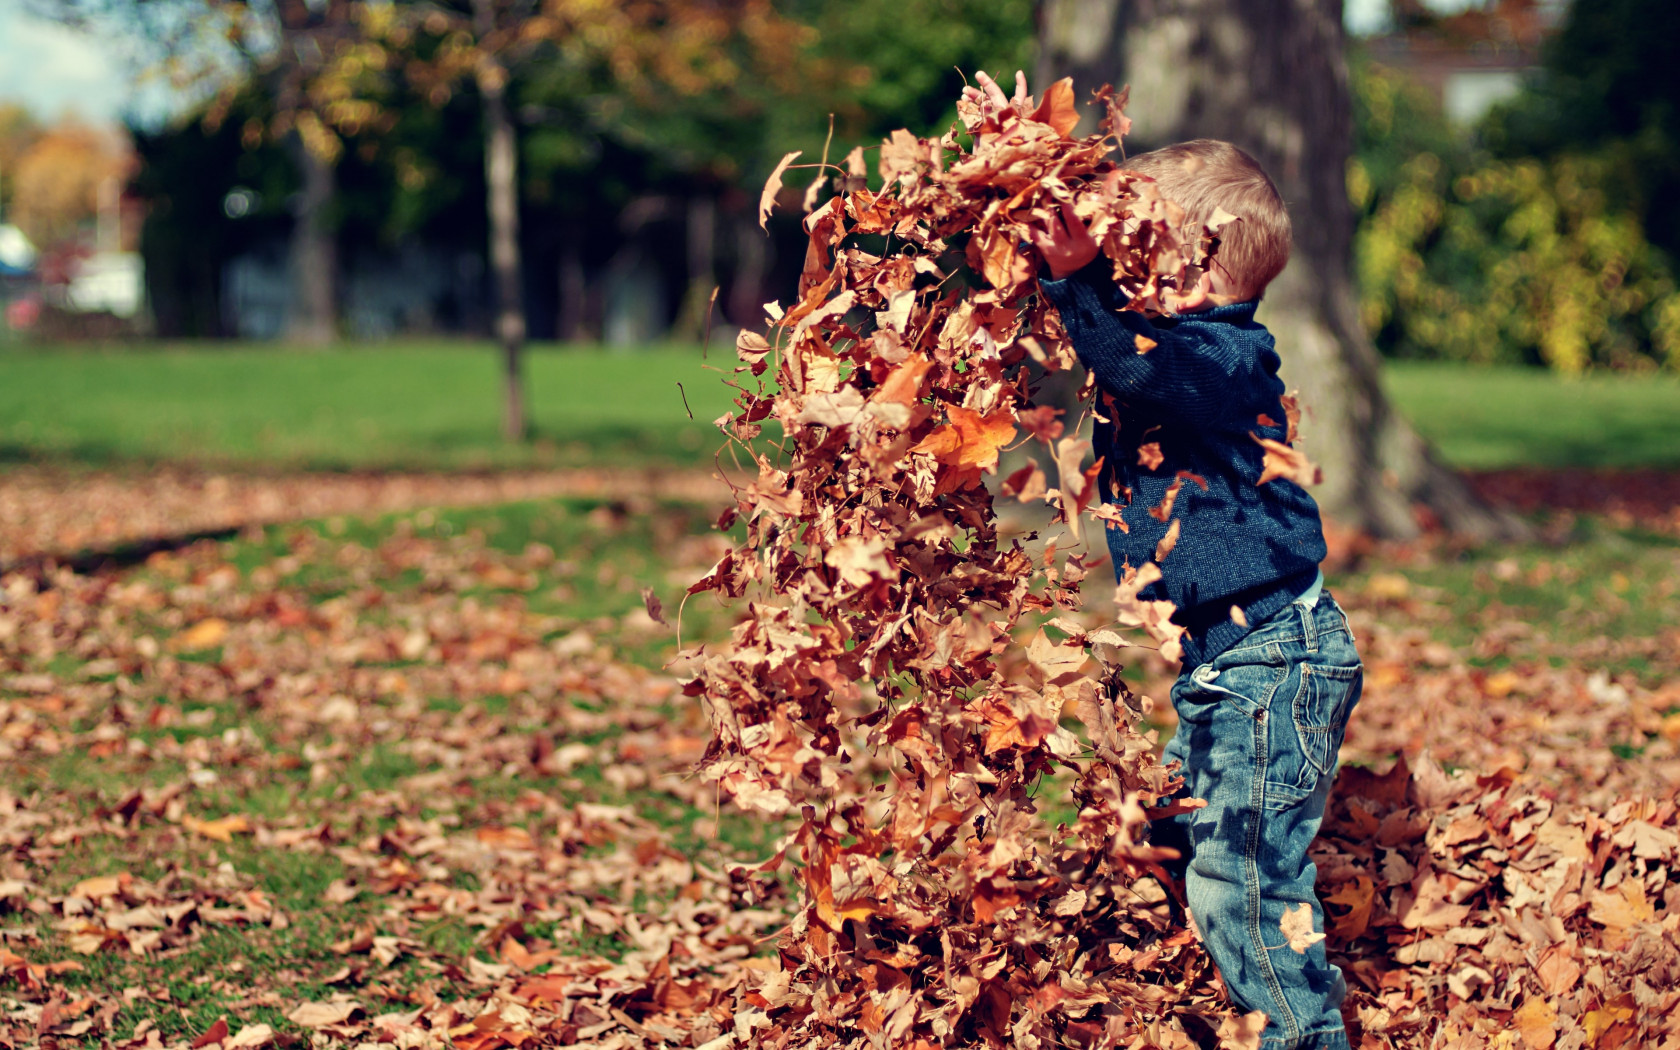 The child is playing with leaves wallpaper 1680x1050